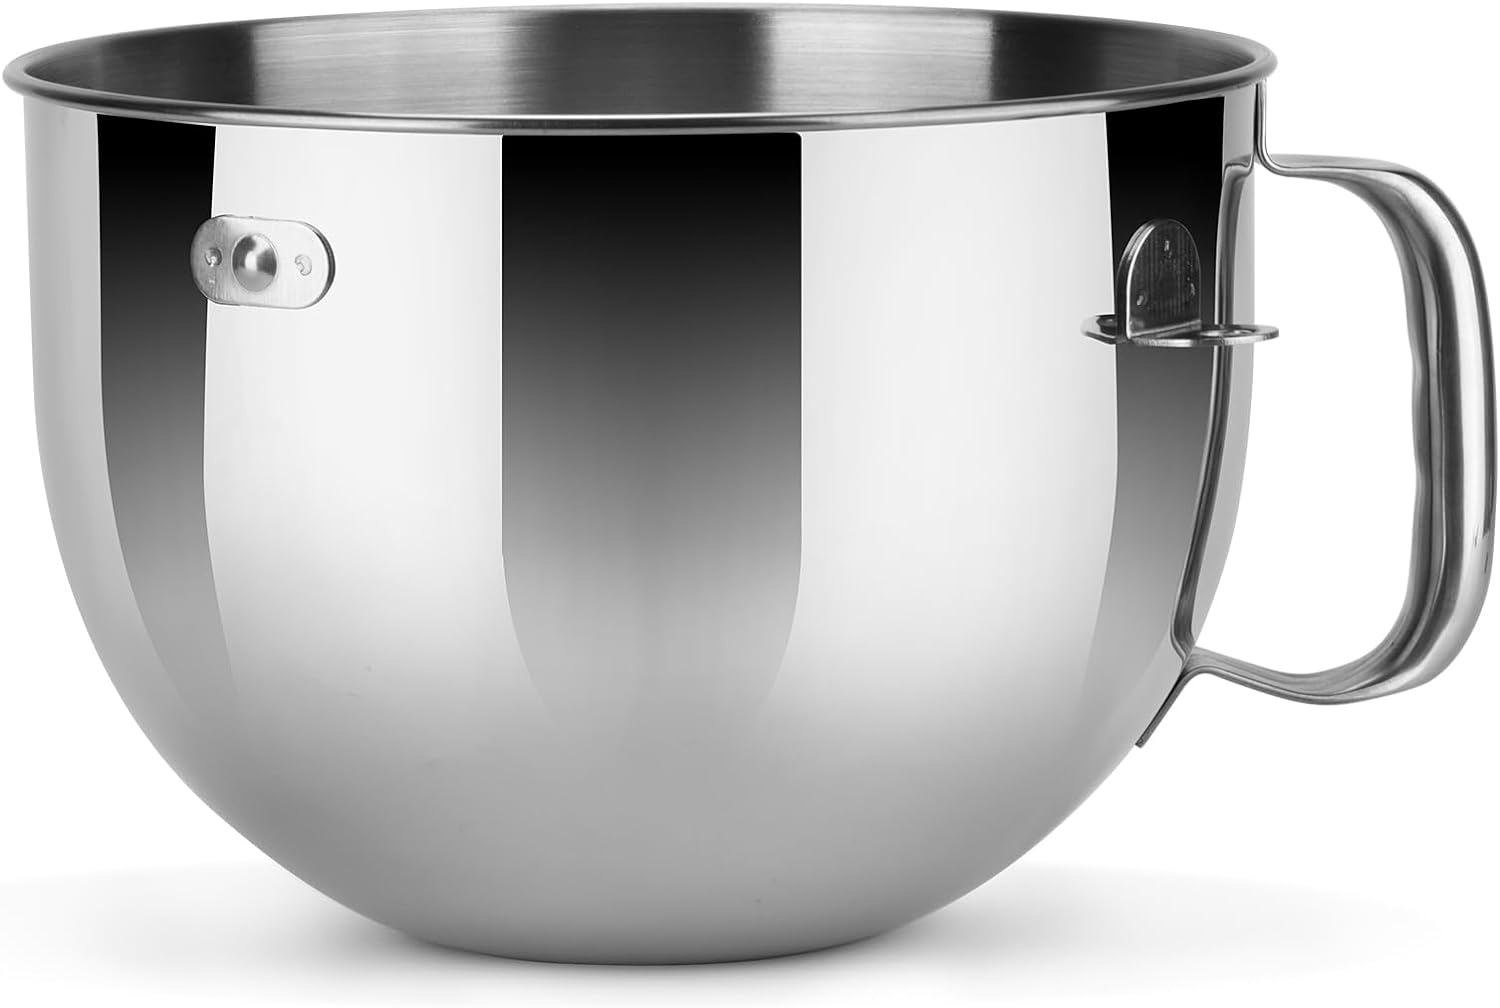 Bowl-Lift Polished Stainless Steel Bowl With Handel 6L-6Qt